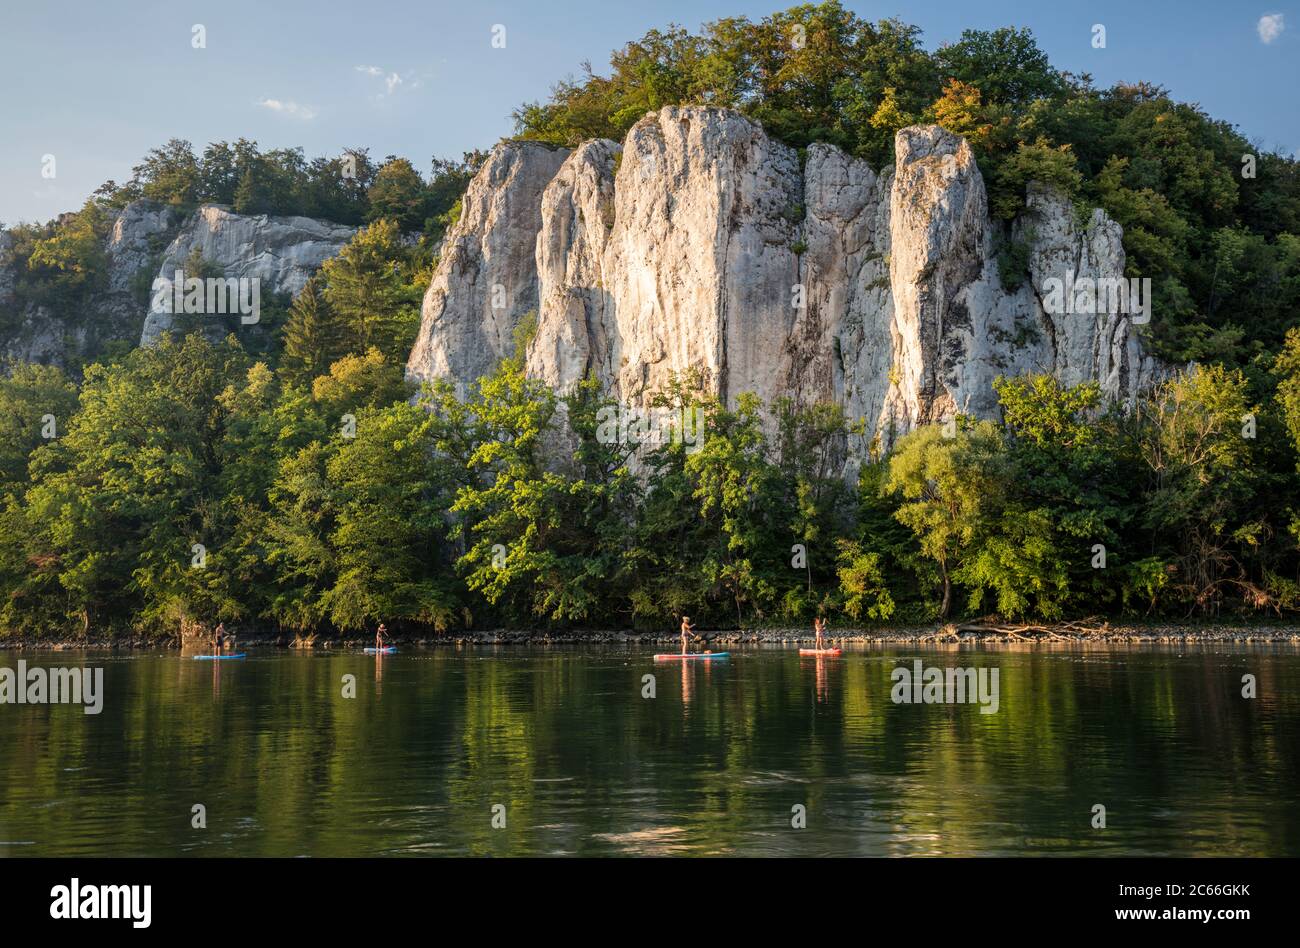 Water sports enthusiasts on stand-up paddleboards in the Weltenburg Narrows near Weltenburg Abbey Stock Photo